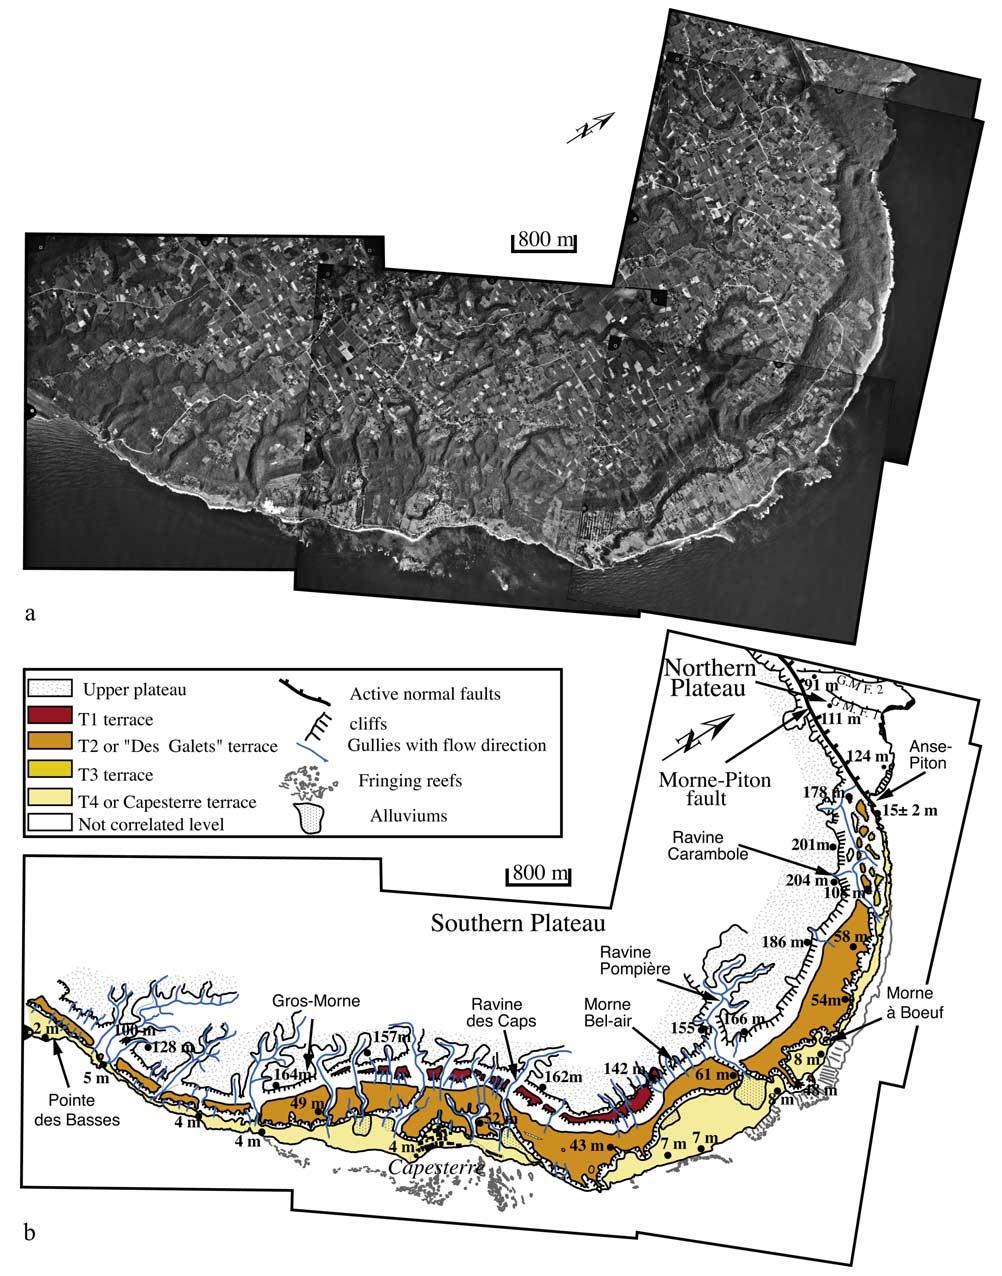 Figure 4. Detailed mapping of Marie-Galante reef terraces on 1:20,000 scale stereoscopic aerial photographs from French Institut Géographique National.